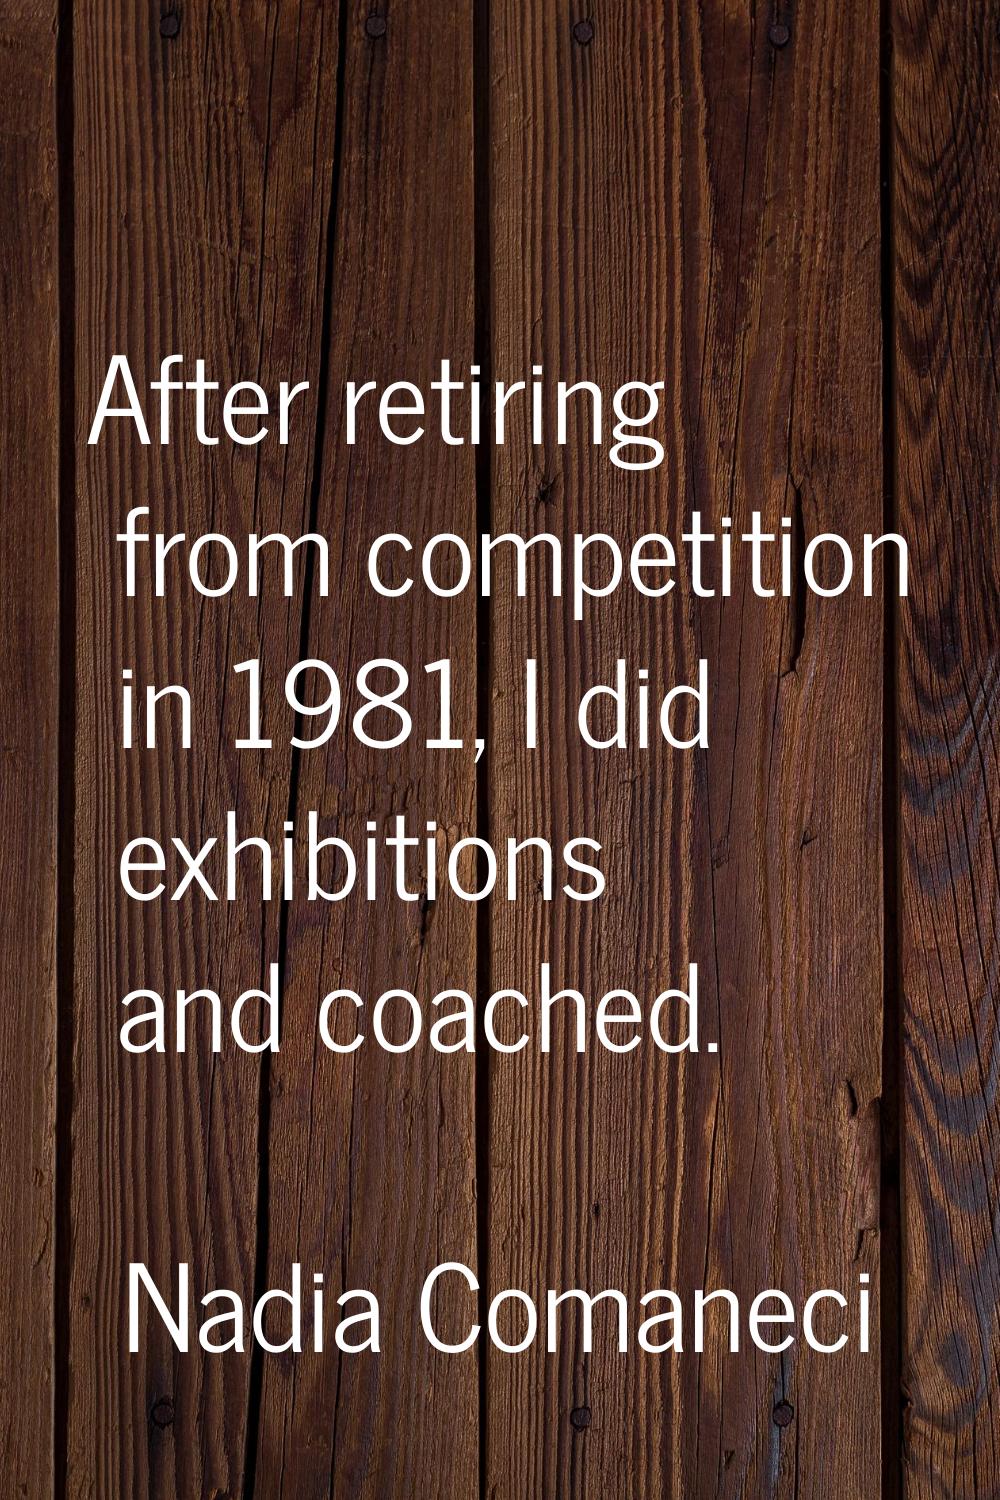 After retiring from competition in 1981, I did exhibitions and coached.